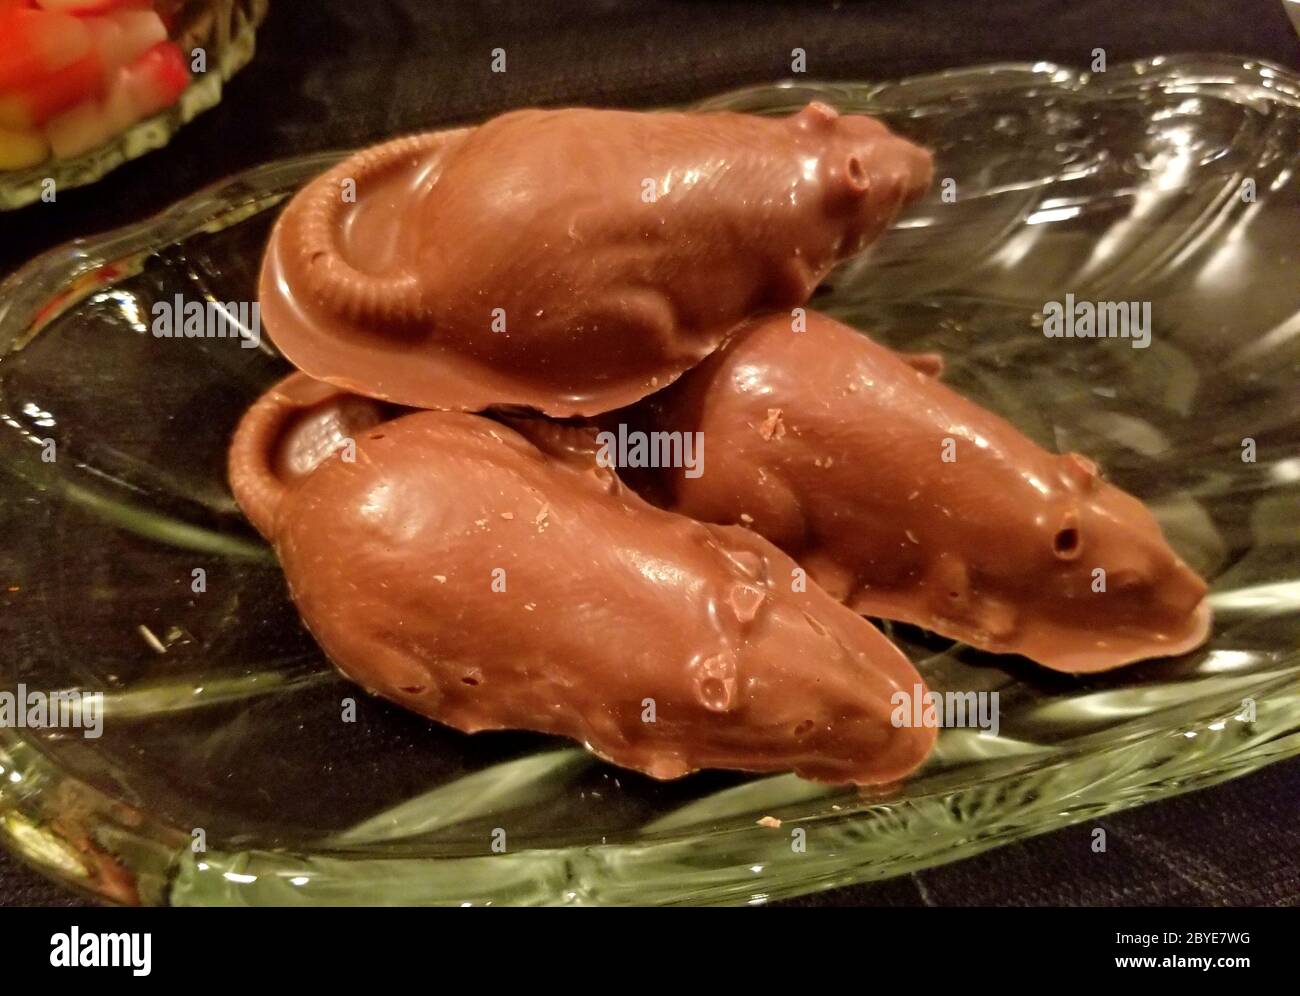 Chocolate in the shape of rats for Halloween dessert Stock Photo